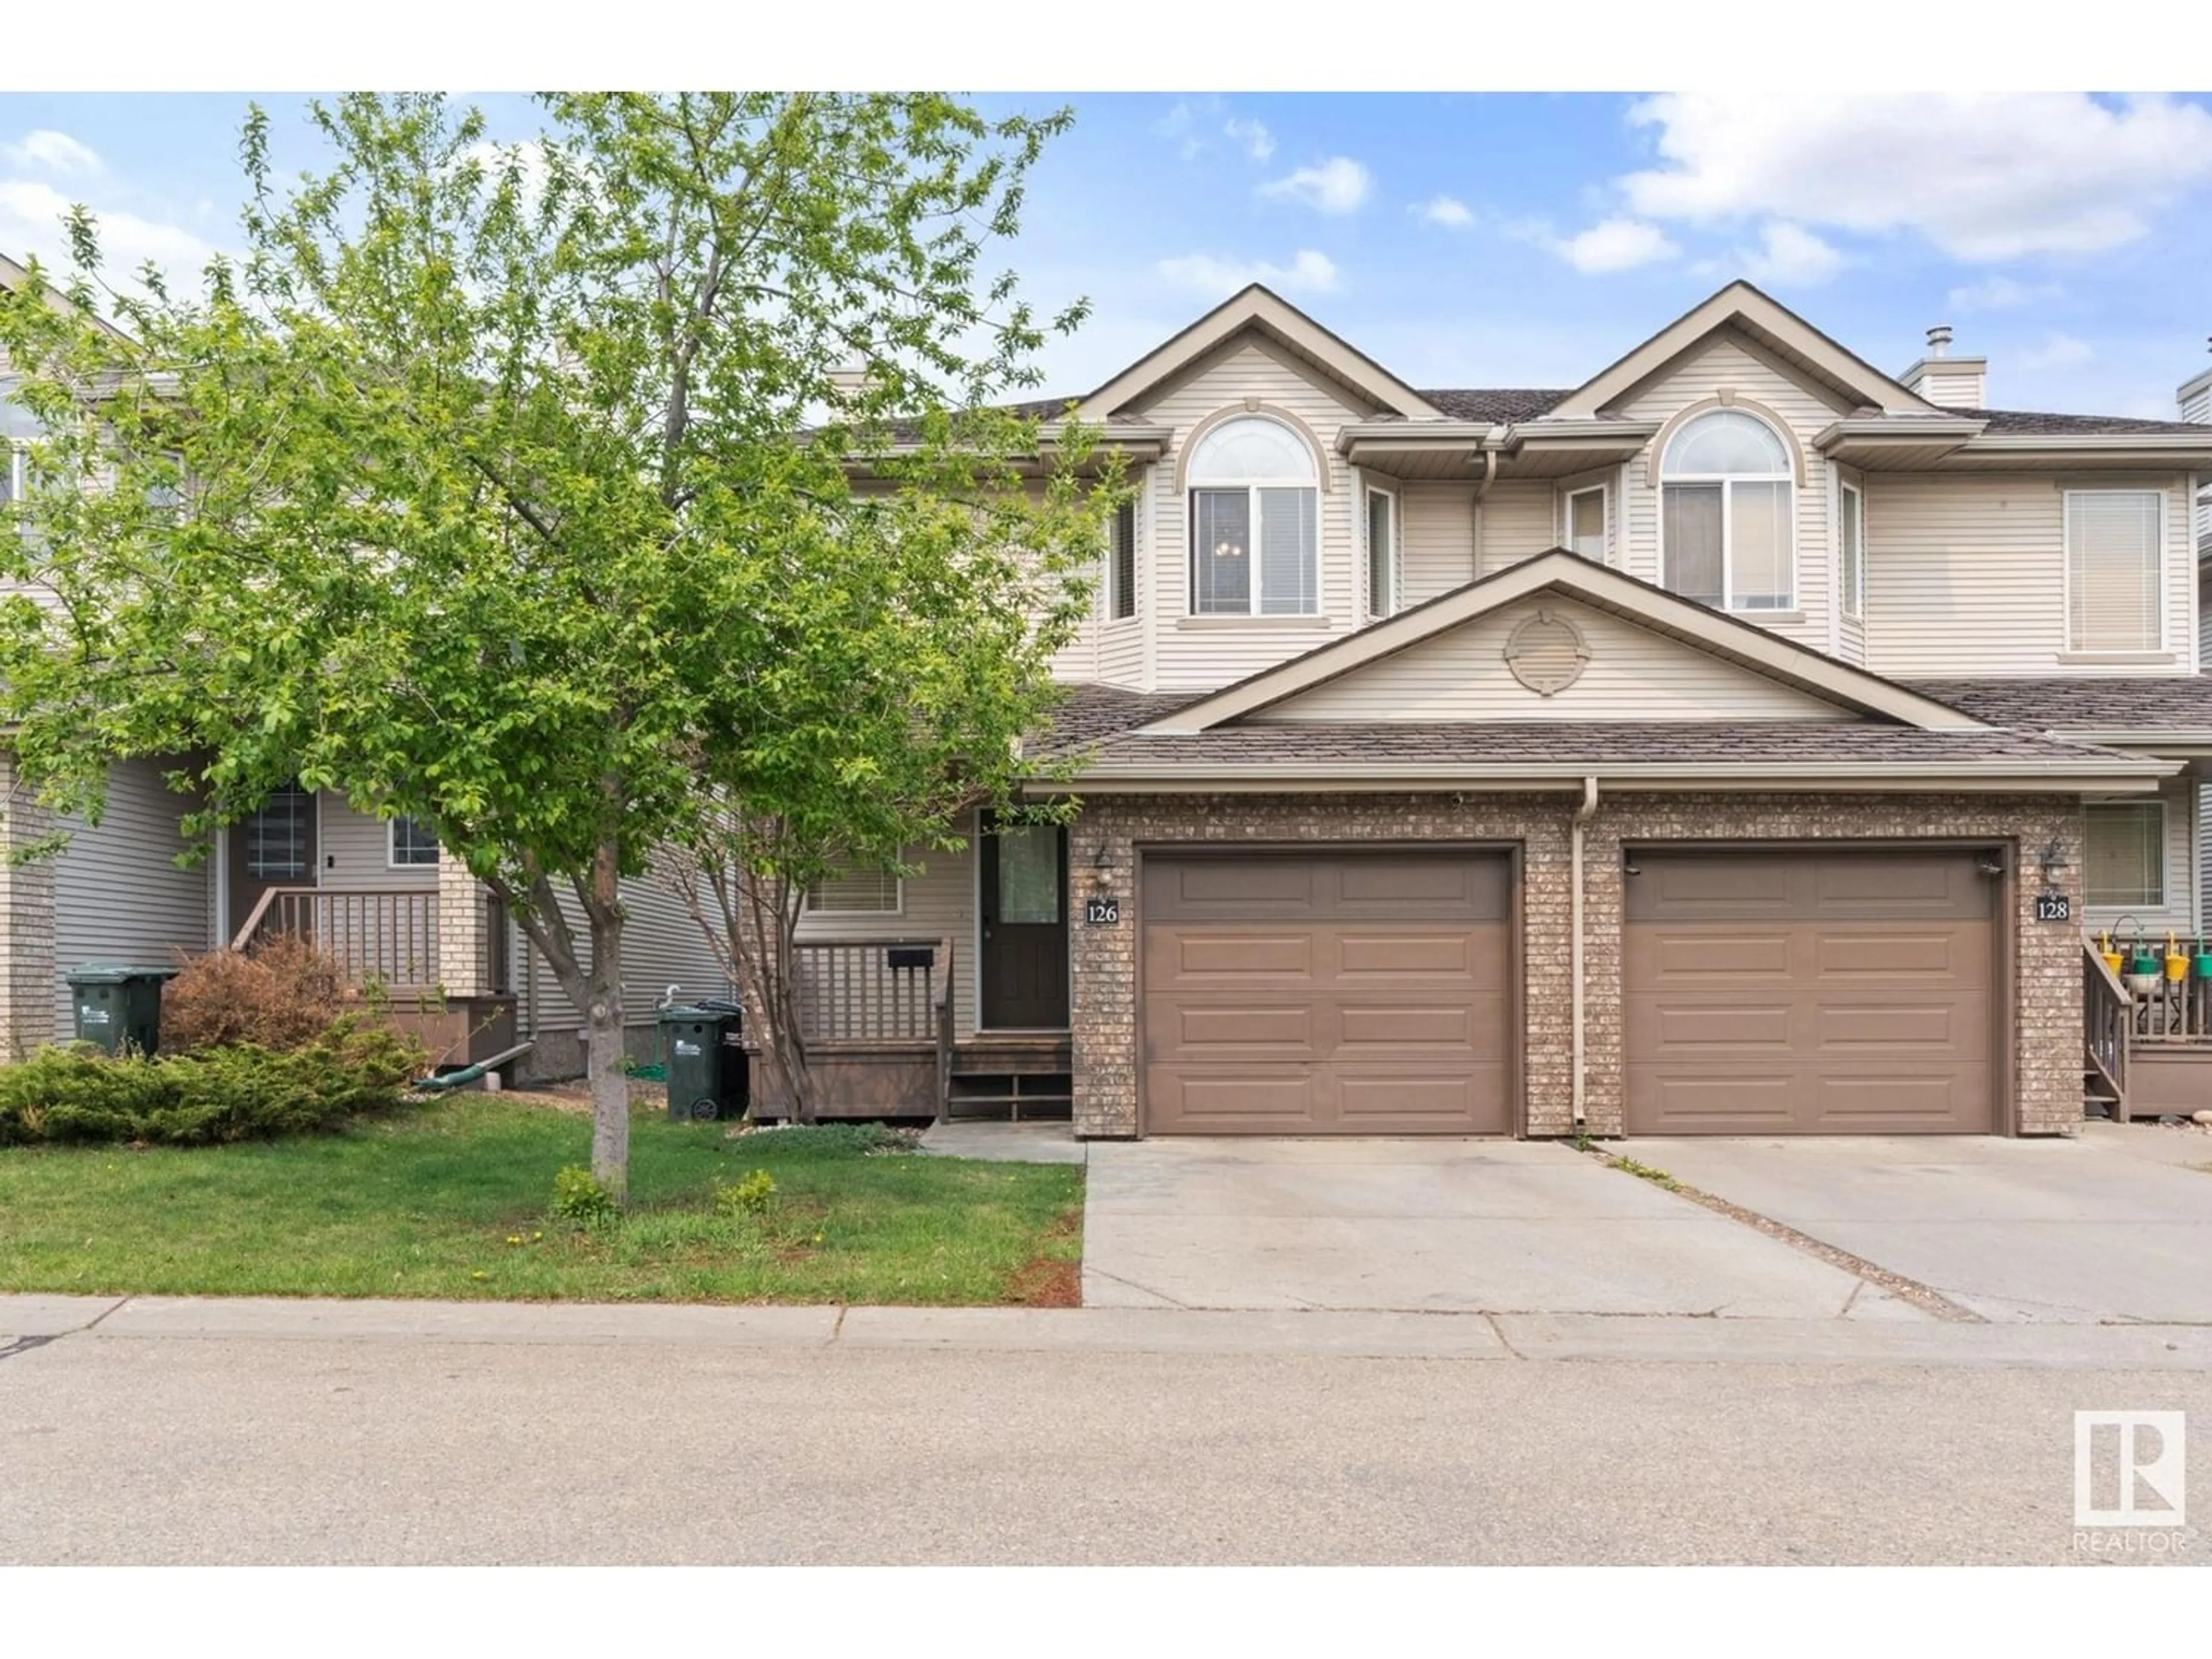 A pic from exterior of the house or condo for #126 155 CROCUS CR, Sherwood Park Alberta T8H2M4